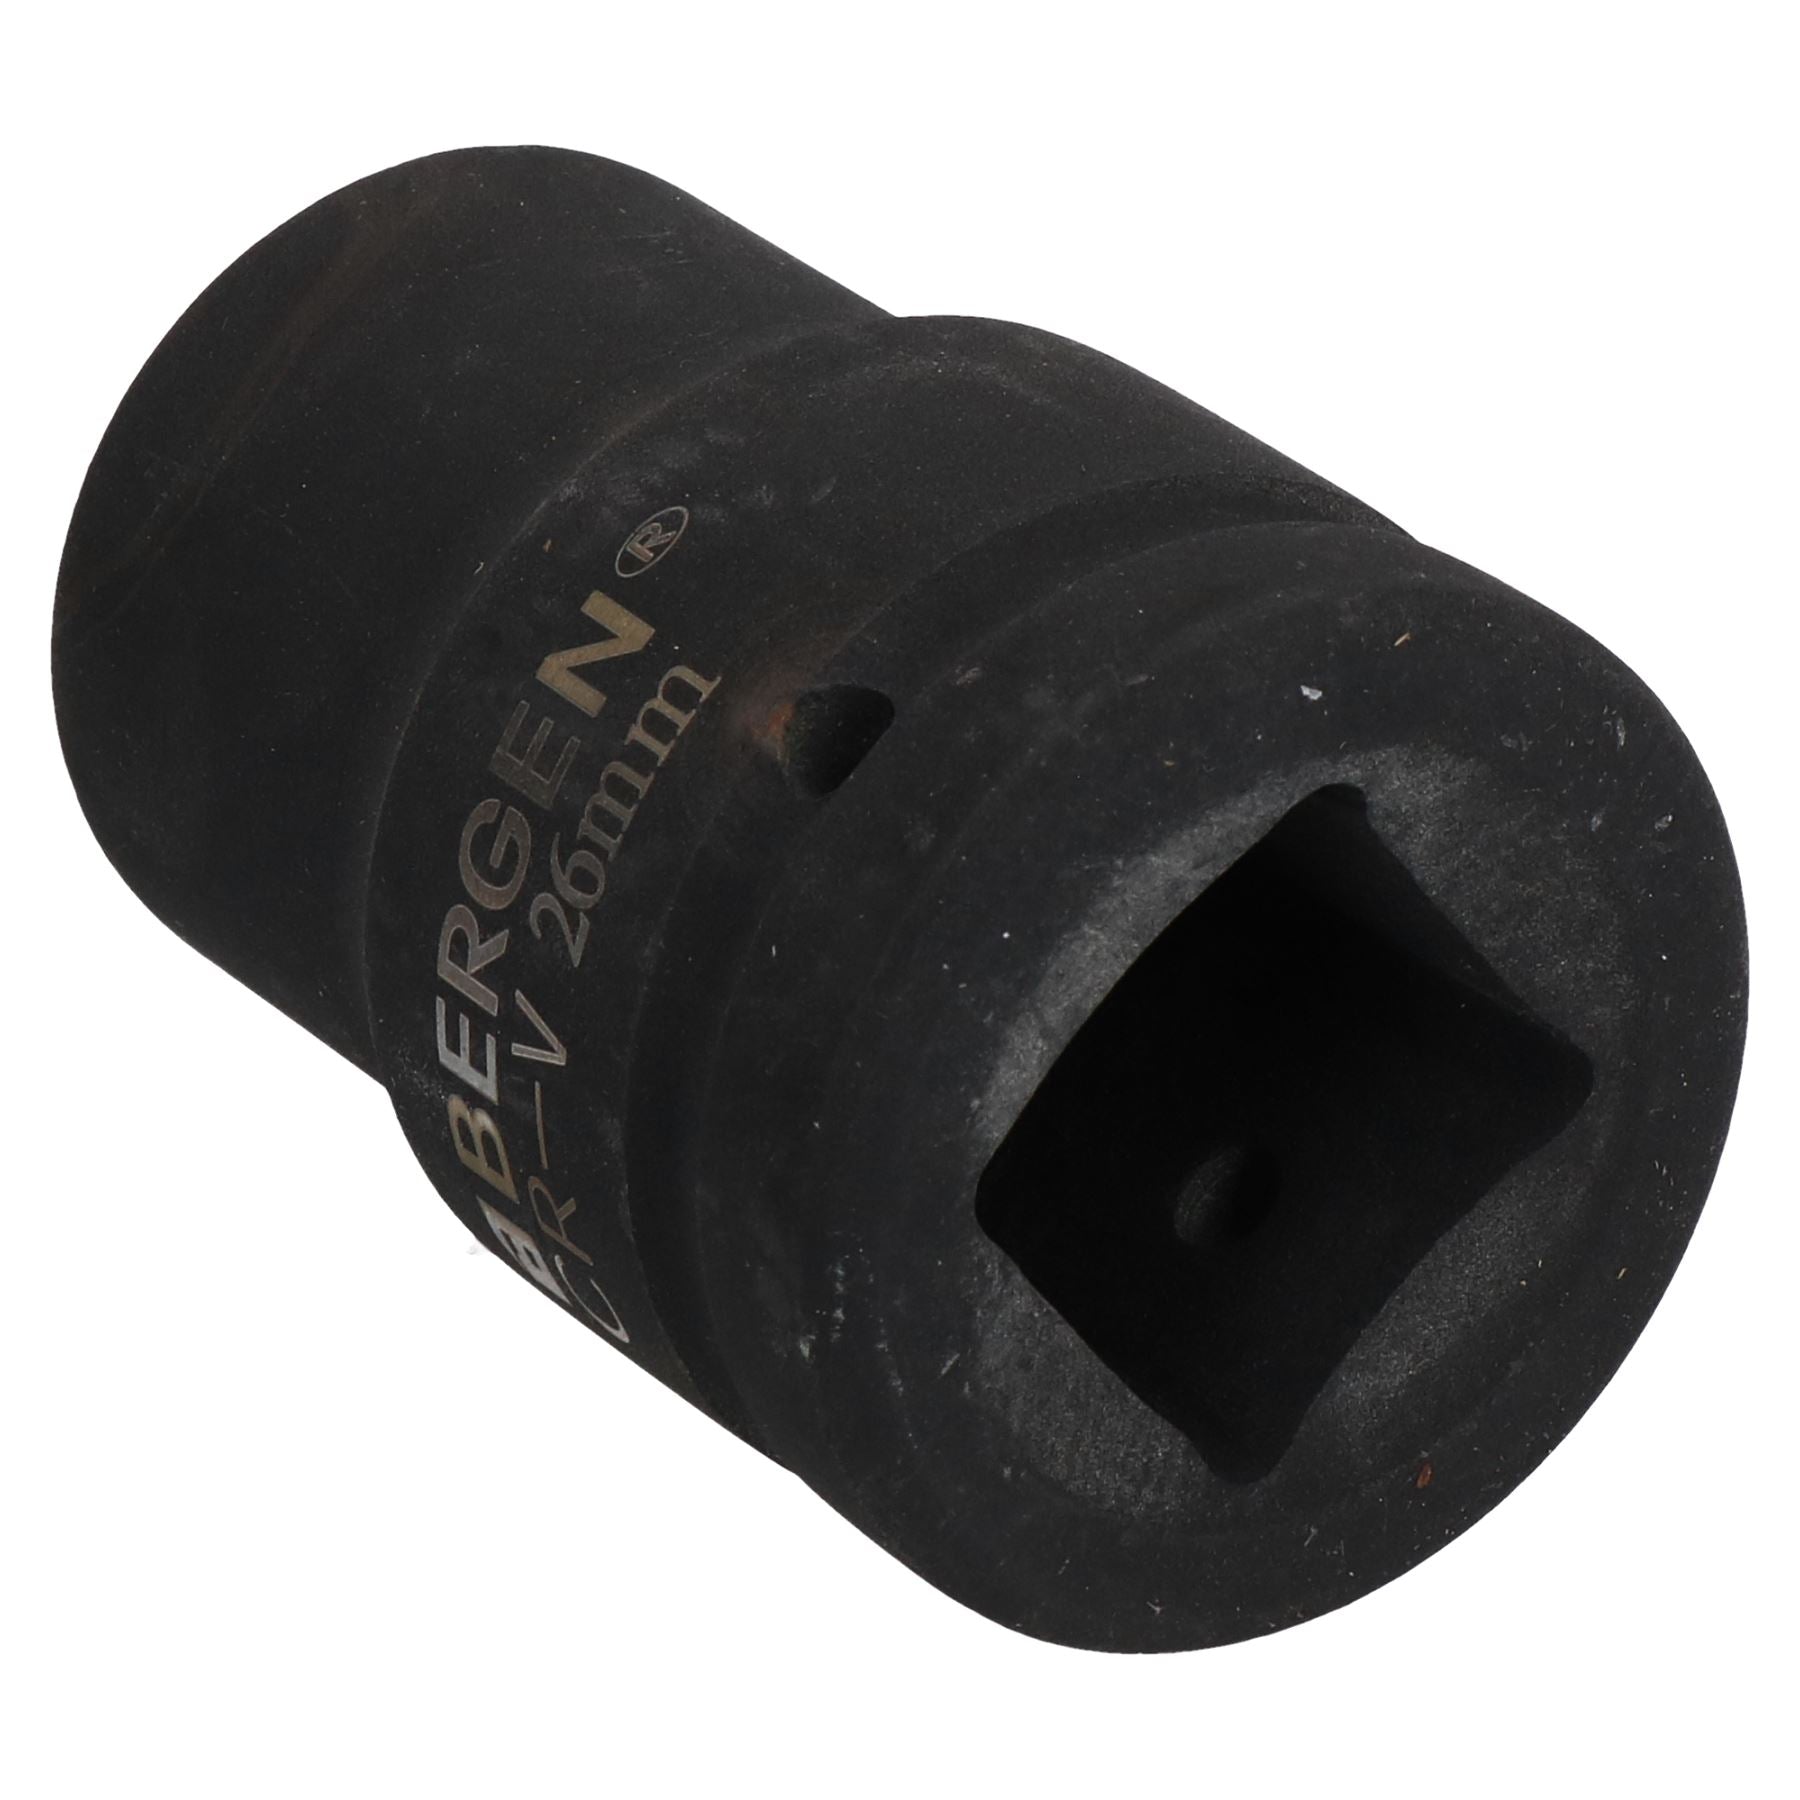 26mm Metric 3/4" or 1" Drive Deep Impact Socket 6 Sided With Step Up Adapter